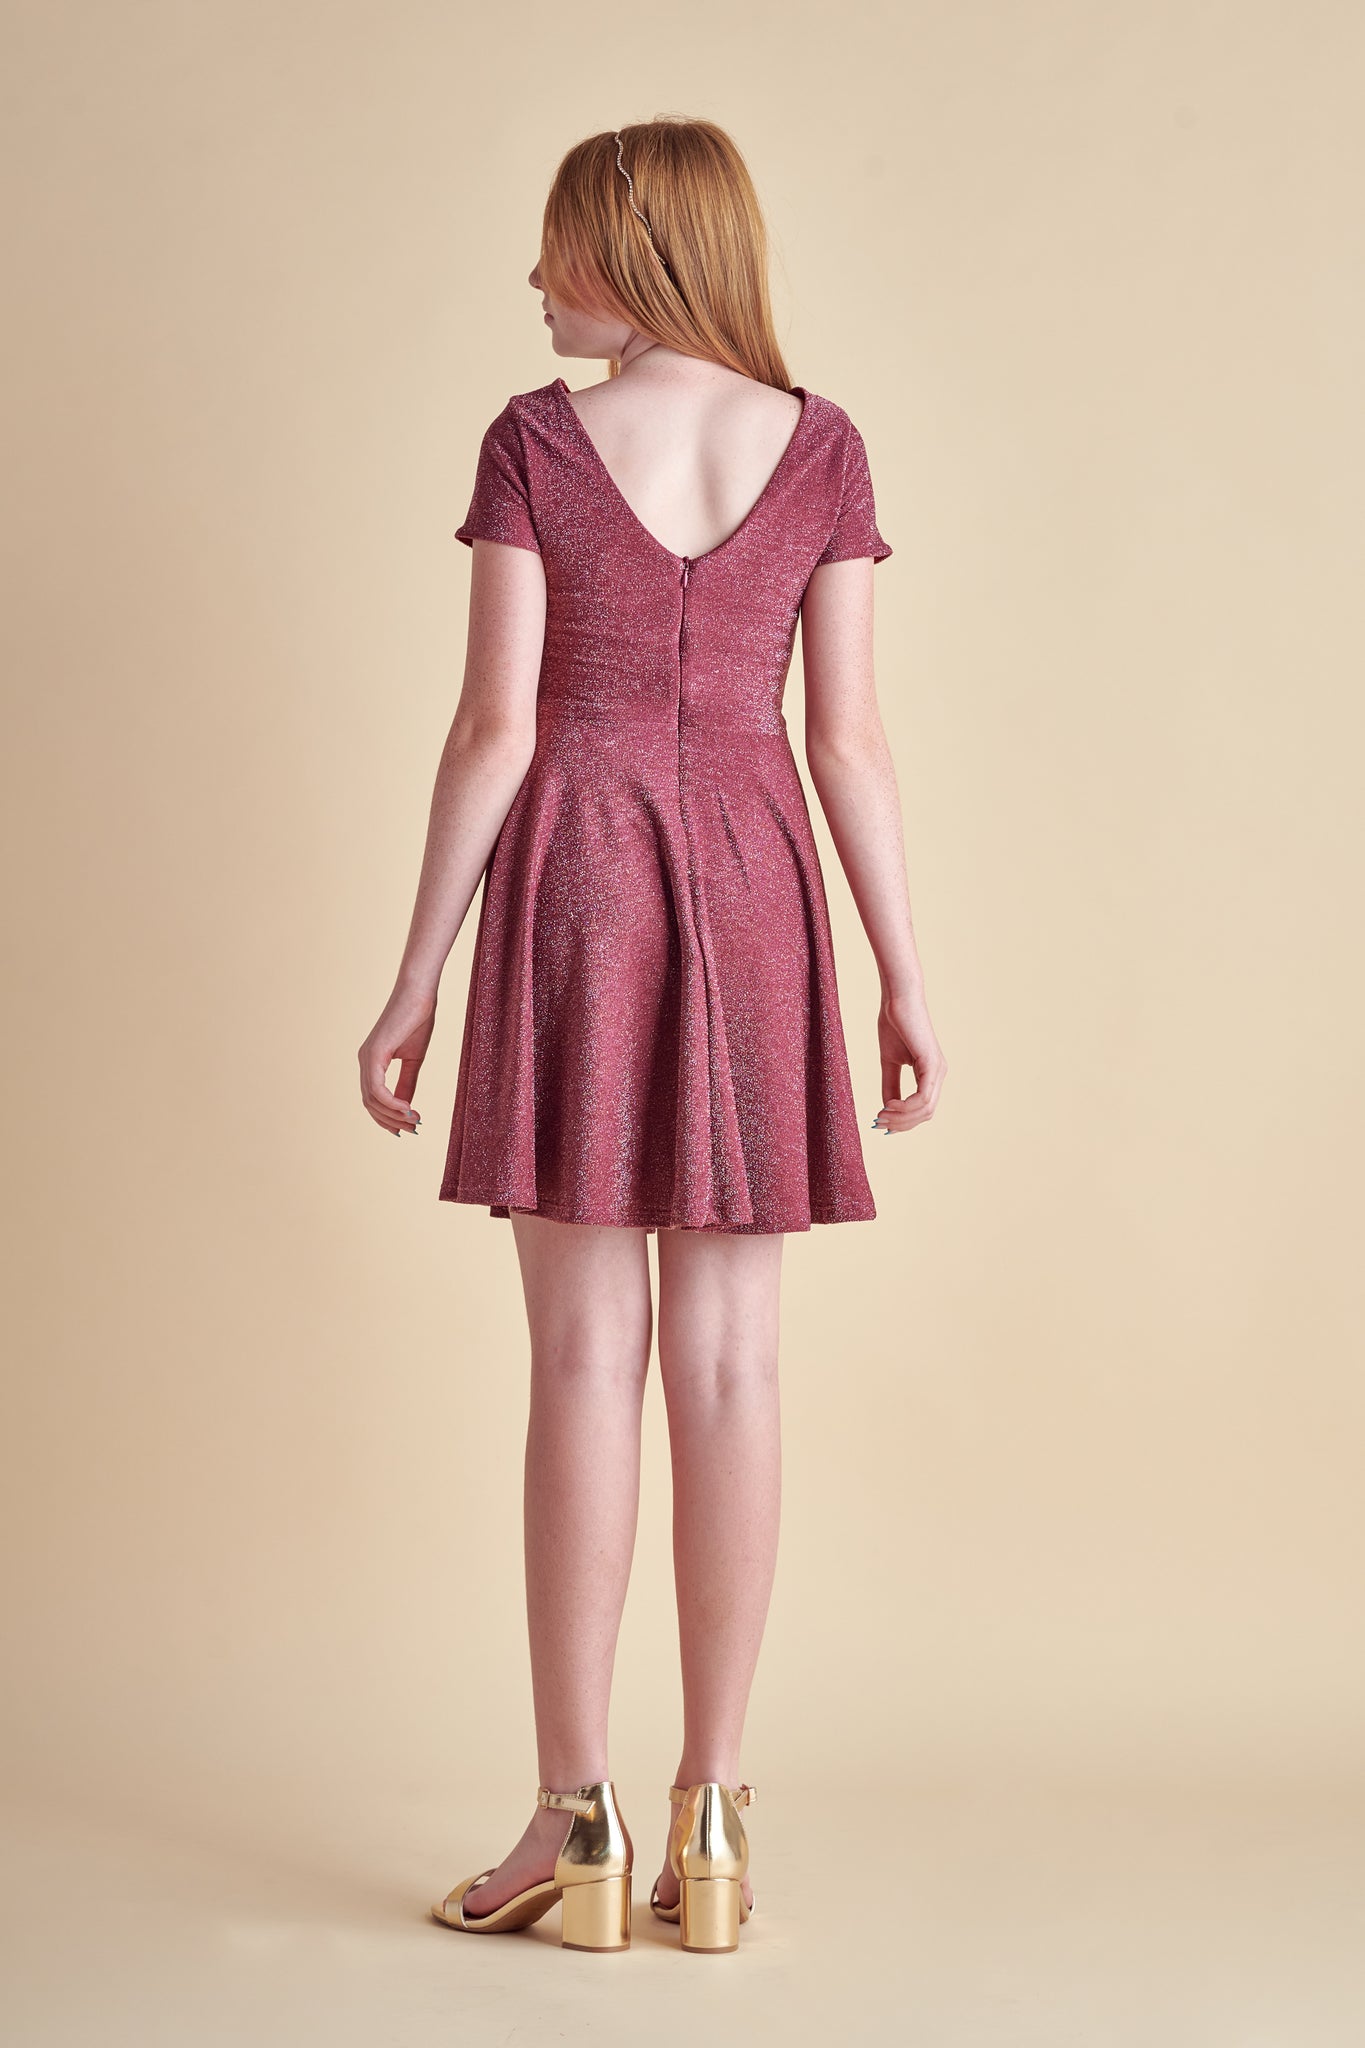 This is an all over wine burgundy stretch glitter dress made with soft lining. It's non-scratch fabric is a perfect dress that hits right above the knee and has a lower v-back detailing.